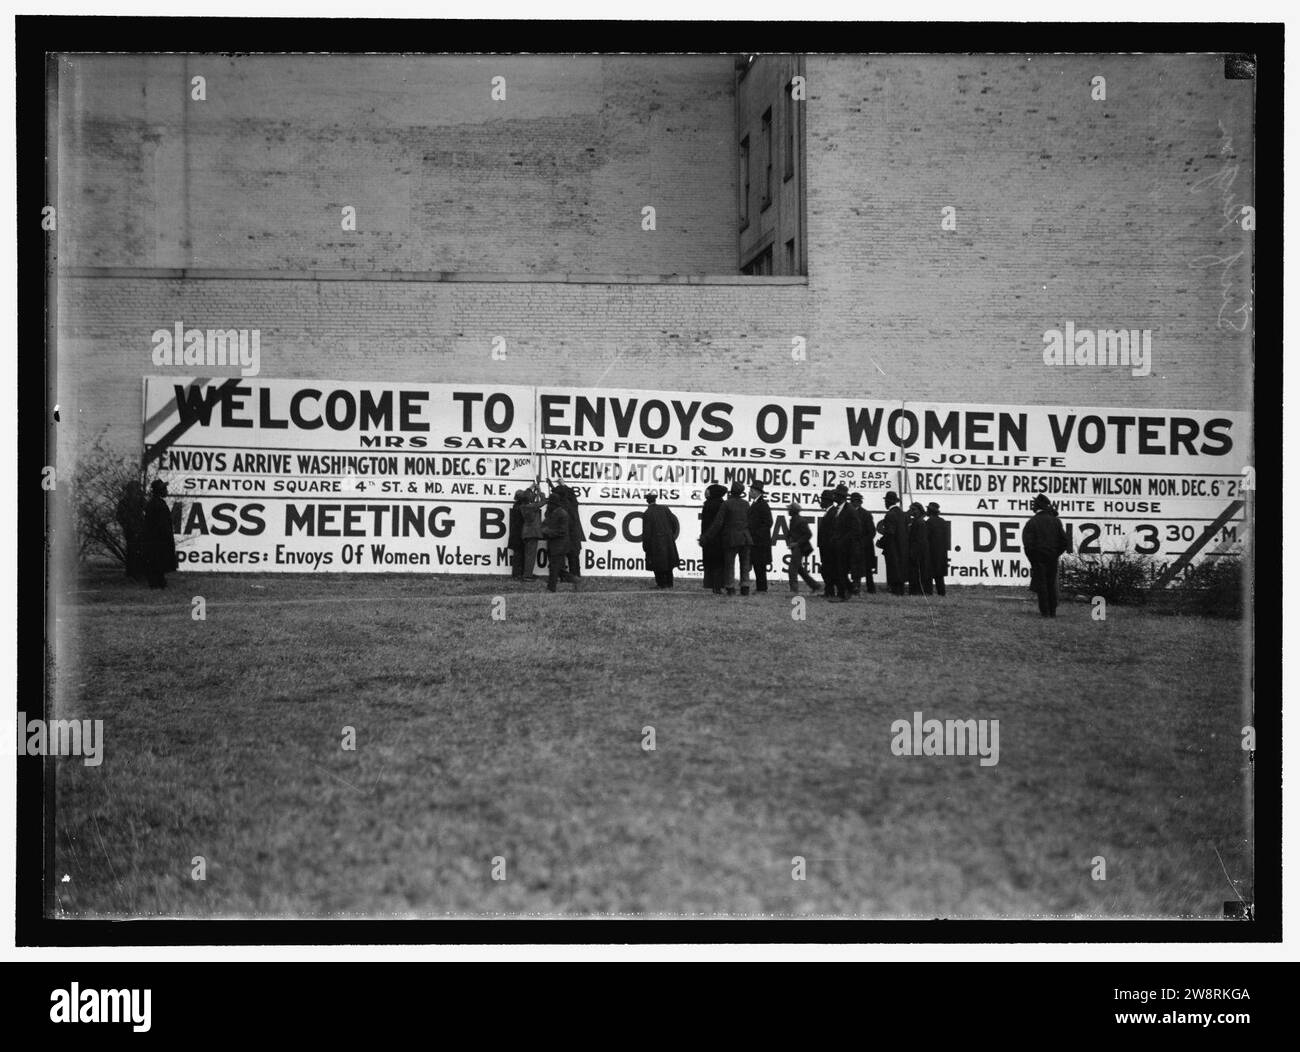 WOMAN SUFFRAGE SIGN- WELCOME TO ENVOYS OF WOMEN VOTERS Stock Photo